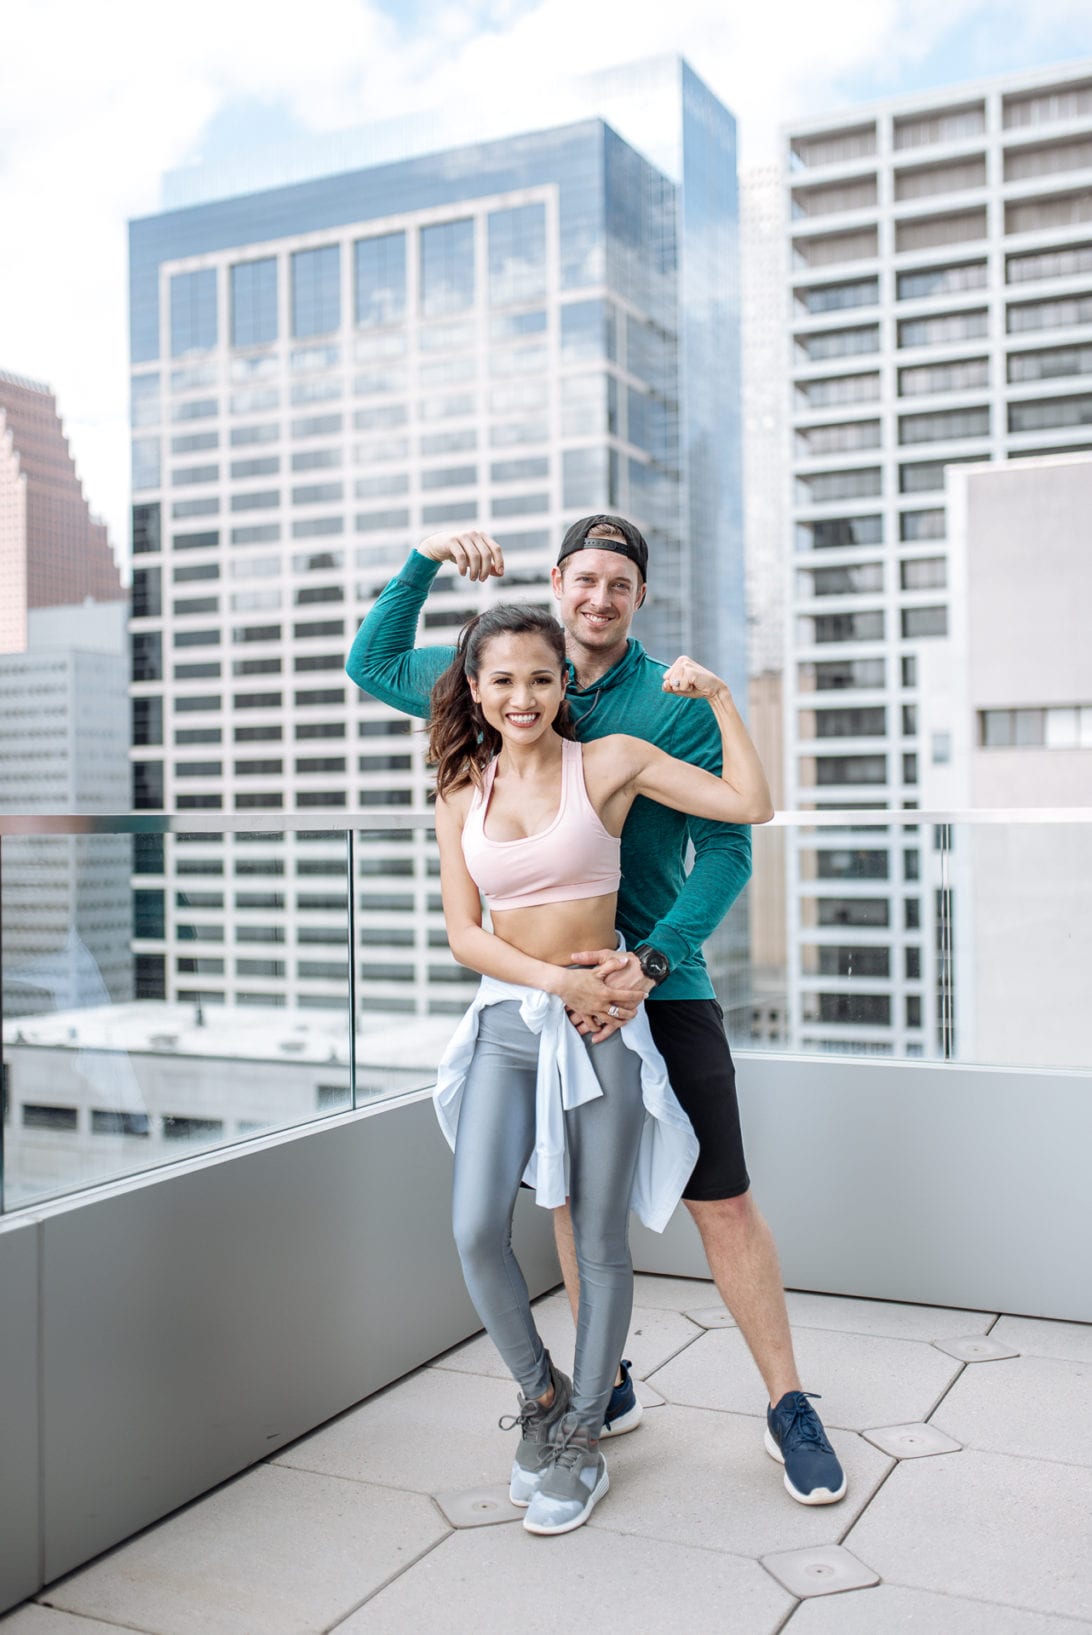 Benefits of Working Out, fit couple, fitness goals, fitness couple, couples who workout, gym partner, fitness partner, fitness goals, fitness style, fitness fashion